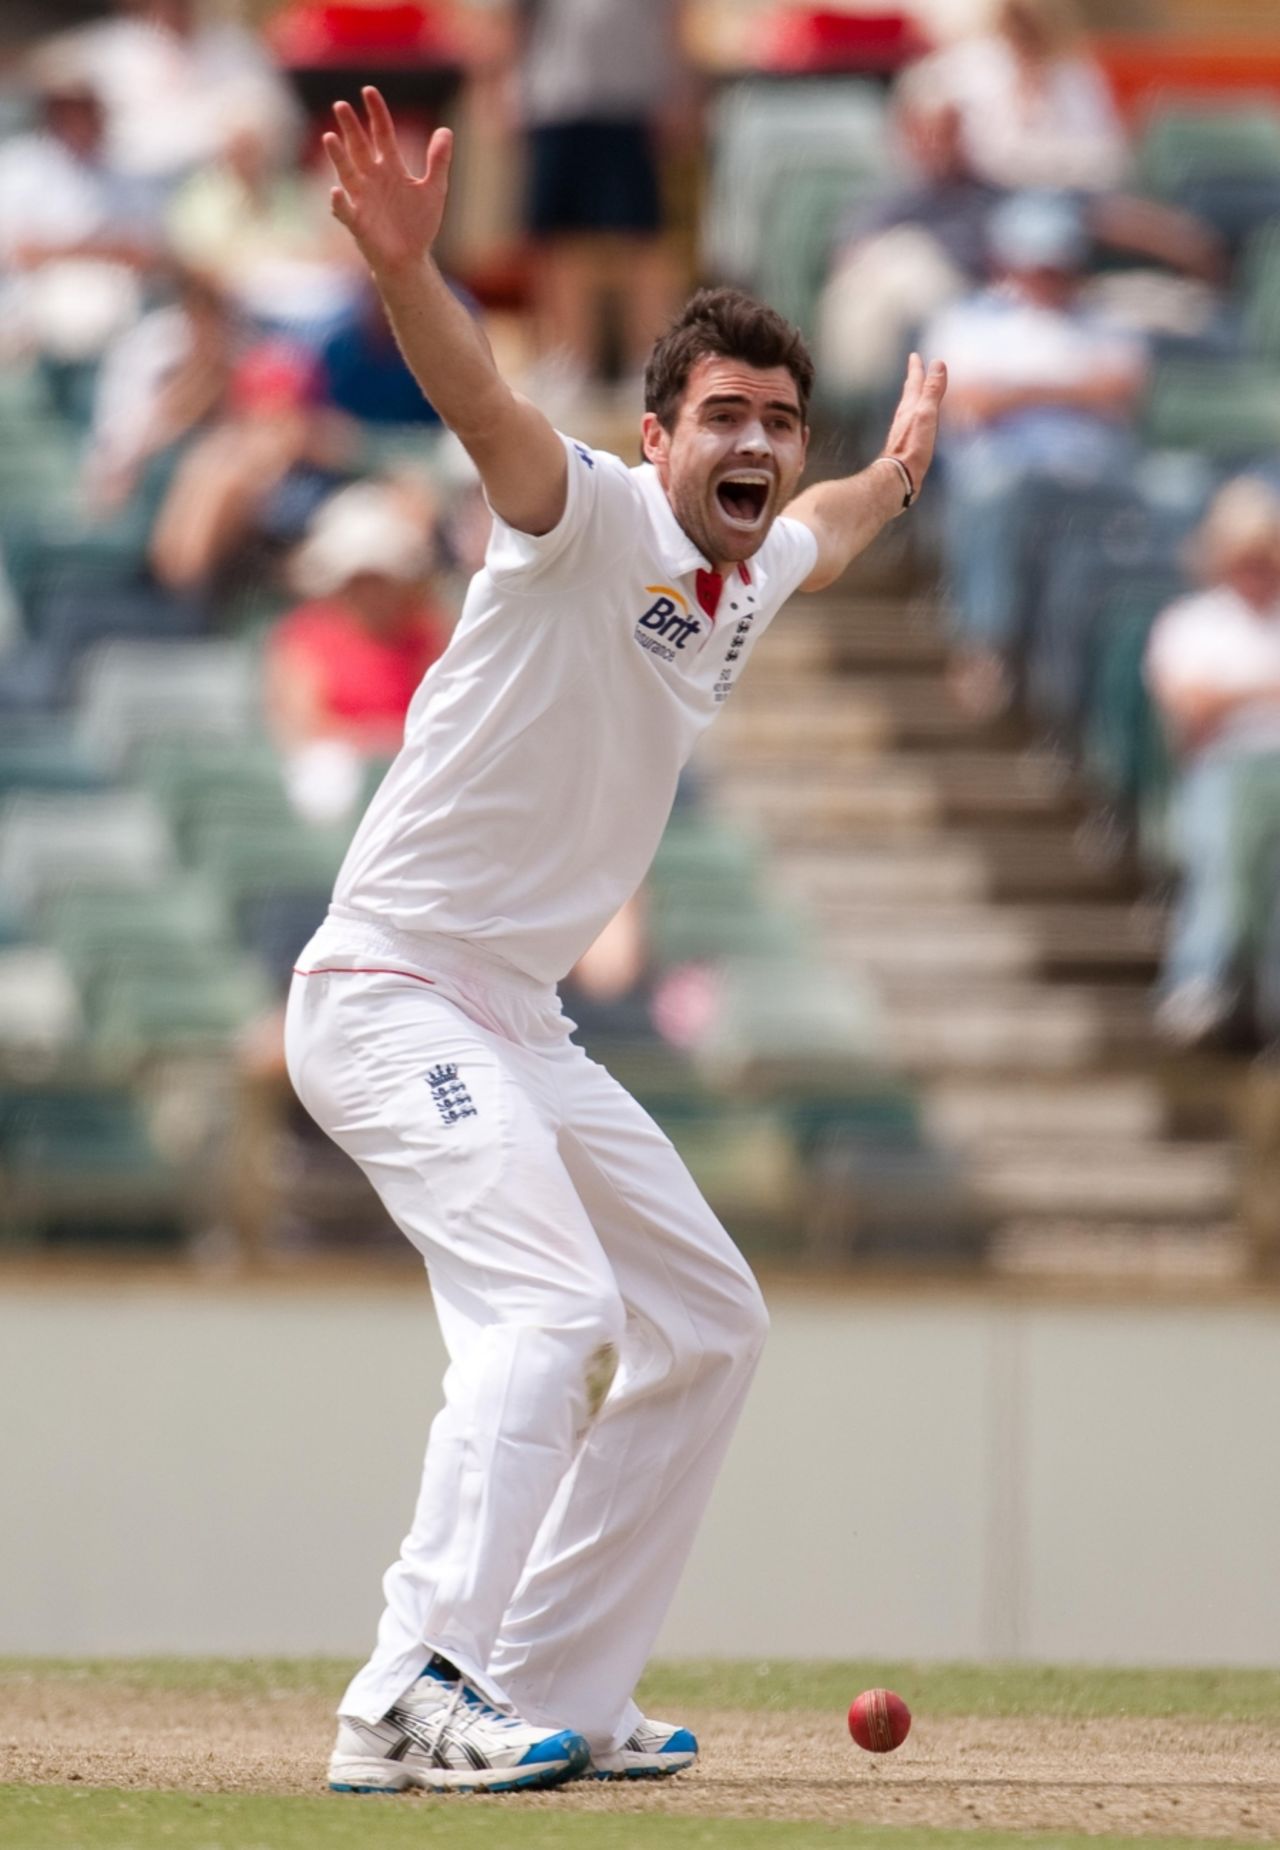 James Anderson launches an unsuccessful appeal for lbw on the first day of England's tour match, Western Australia v England XI, 1st day, Perth, November 5, 2010